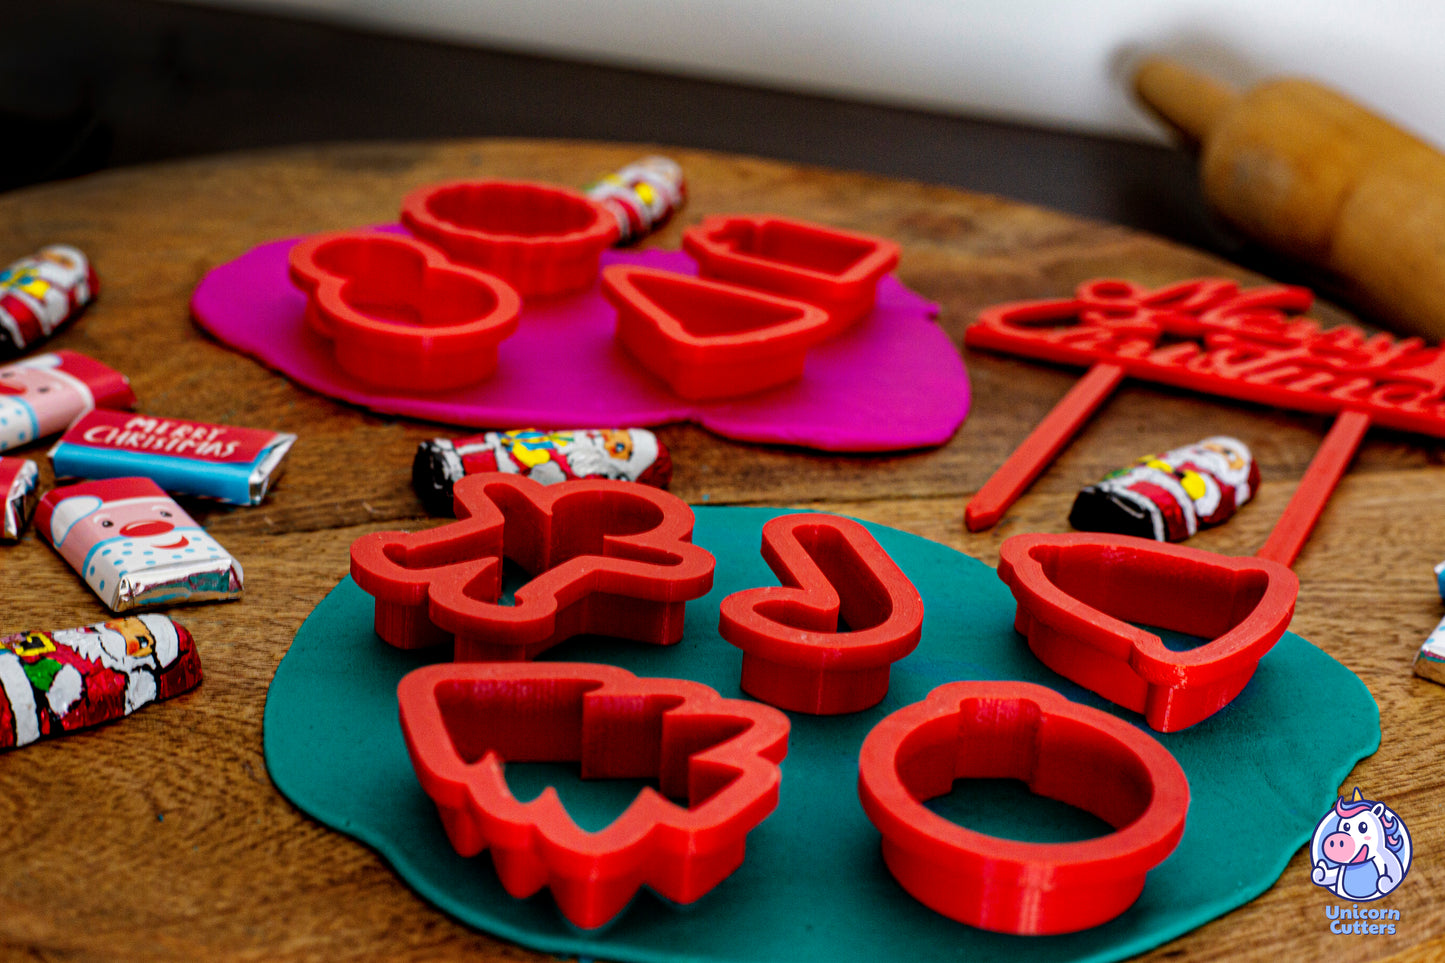 Mini Christmas Cutter Set - Perfect for small cookies, cupcakes and mince pies!